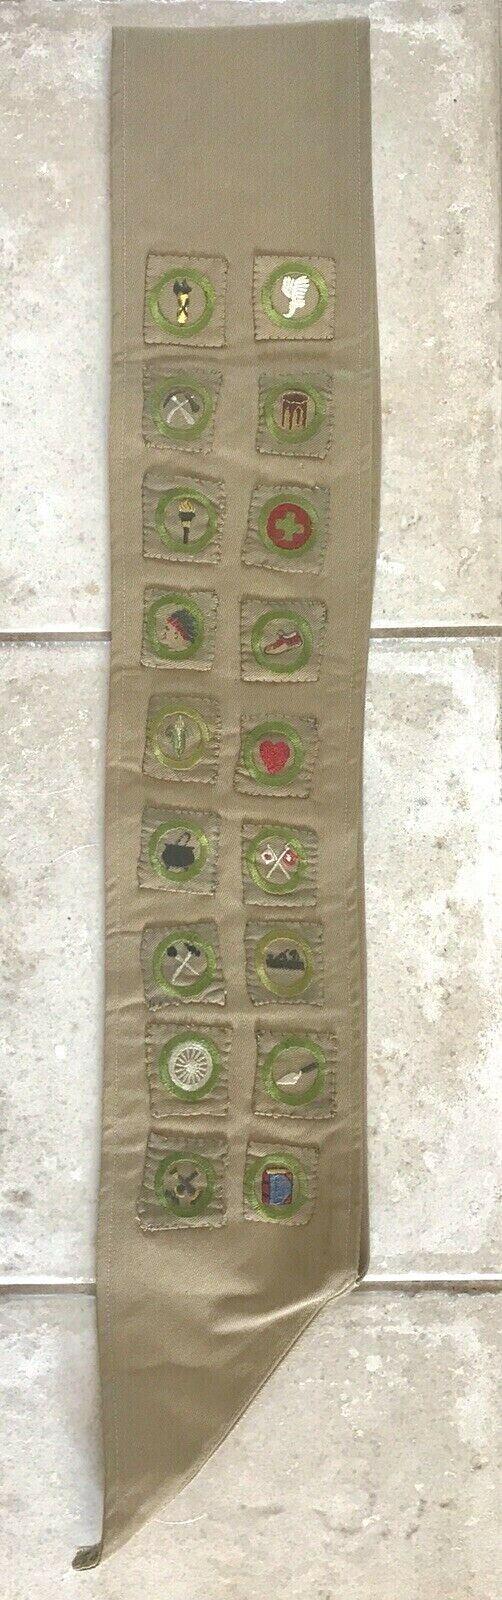 OLD VINTAGE 1930's BSA BOY SCOUTS SASH with 18 PATCHES MERIT BADGES